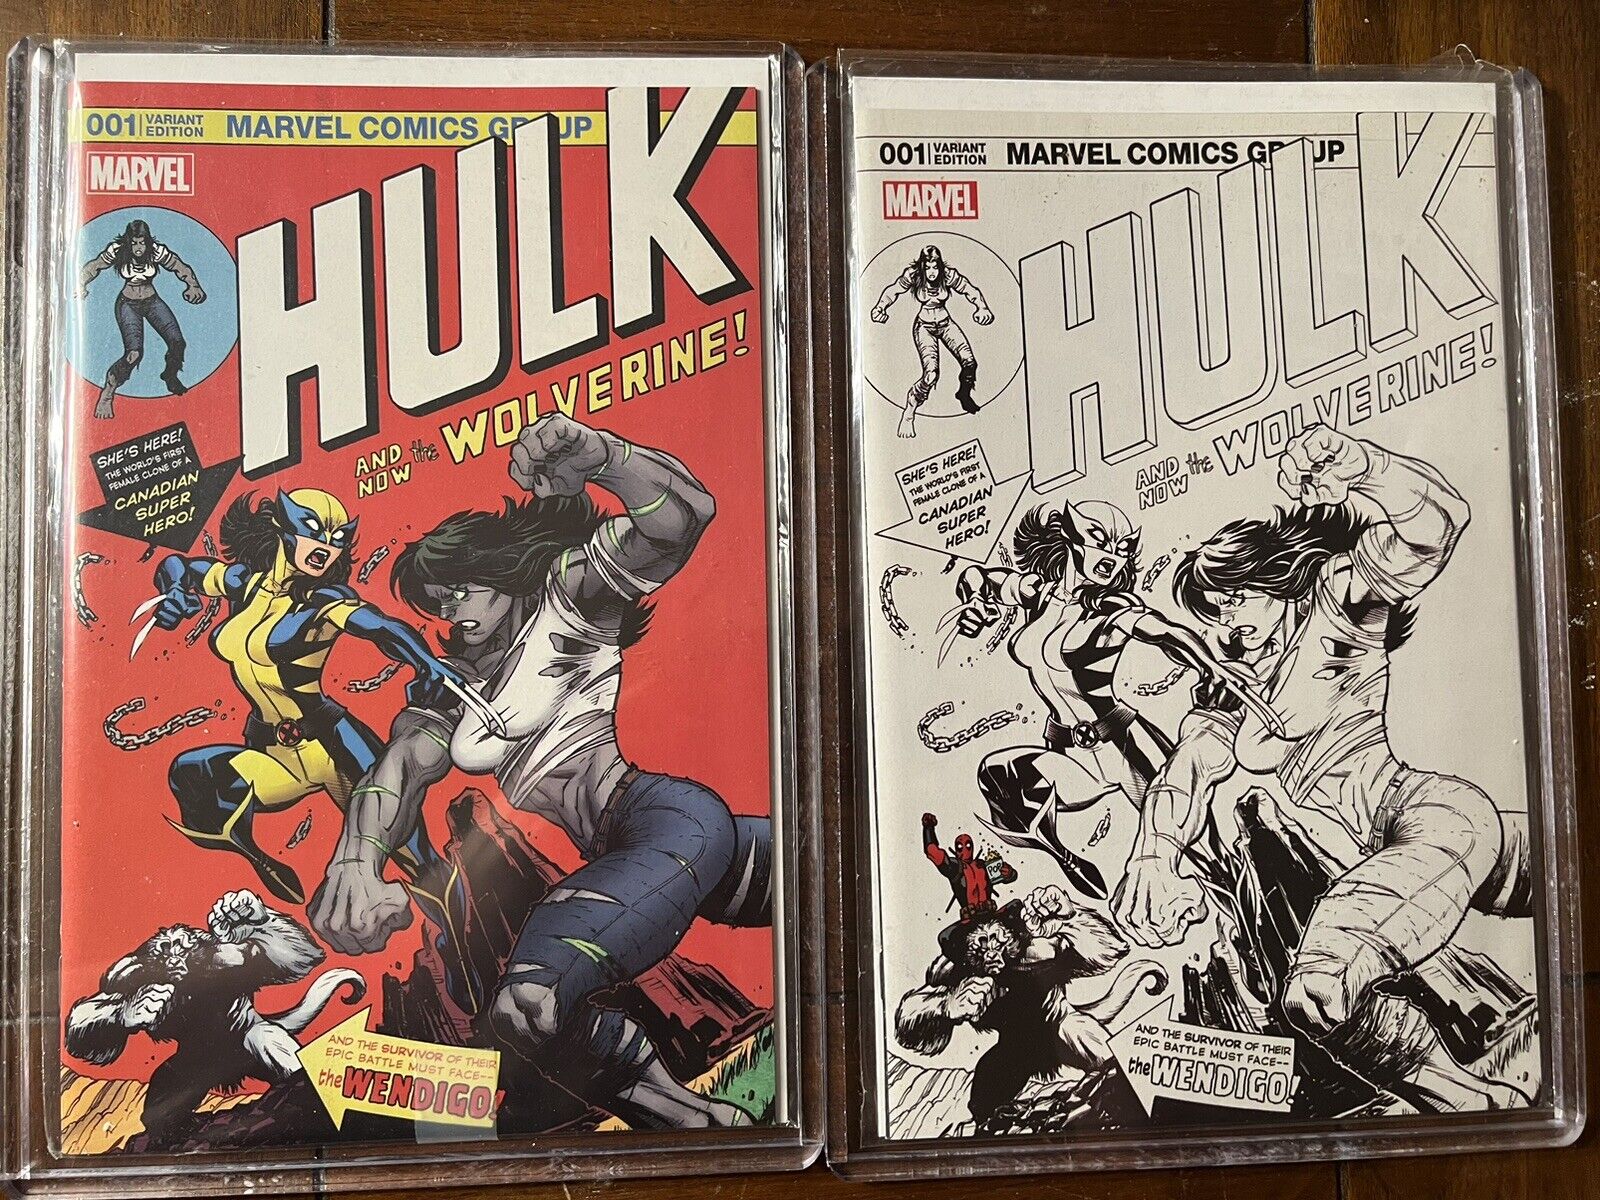 HULK #1 2/17 MCGUINESS VARIANTS RARE SET OF TWO NM TOP-LOADERS VERY NICE